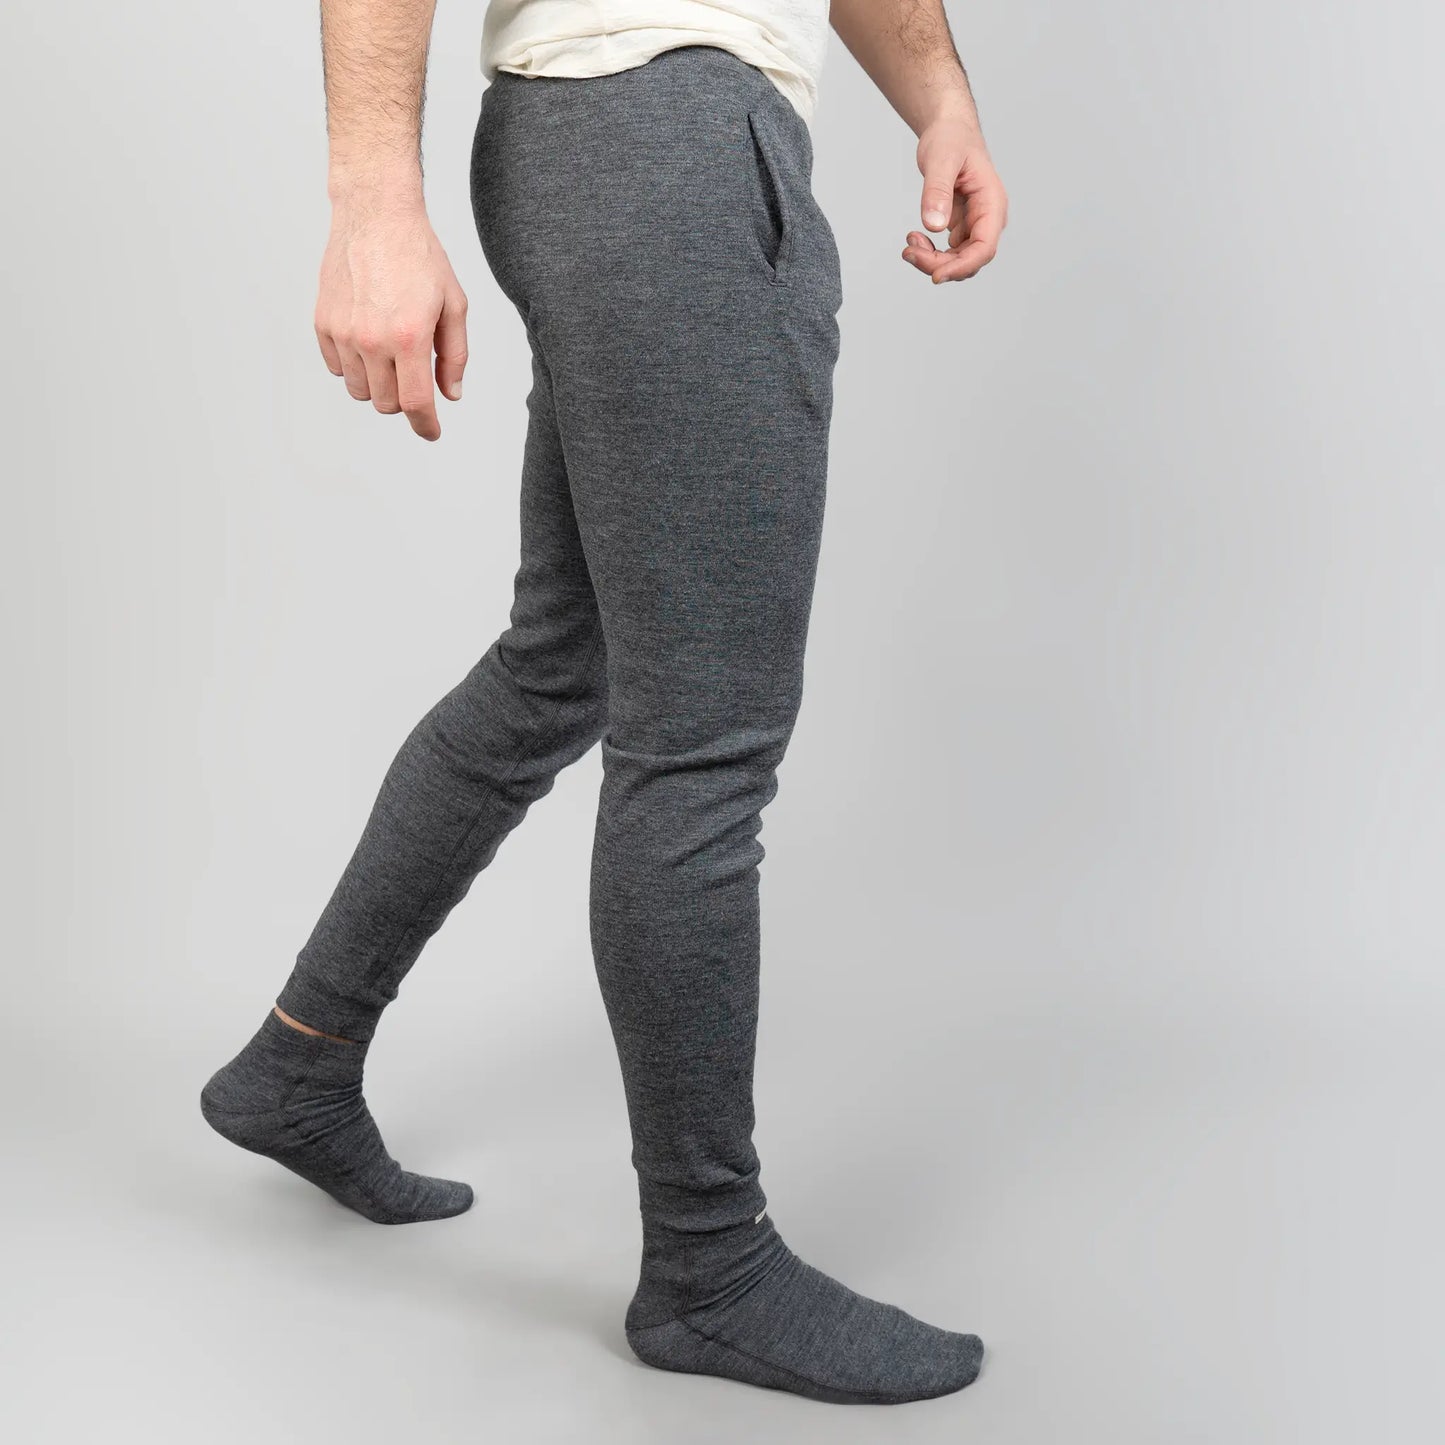 mens all purpose sweatpants midweight color gray